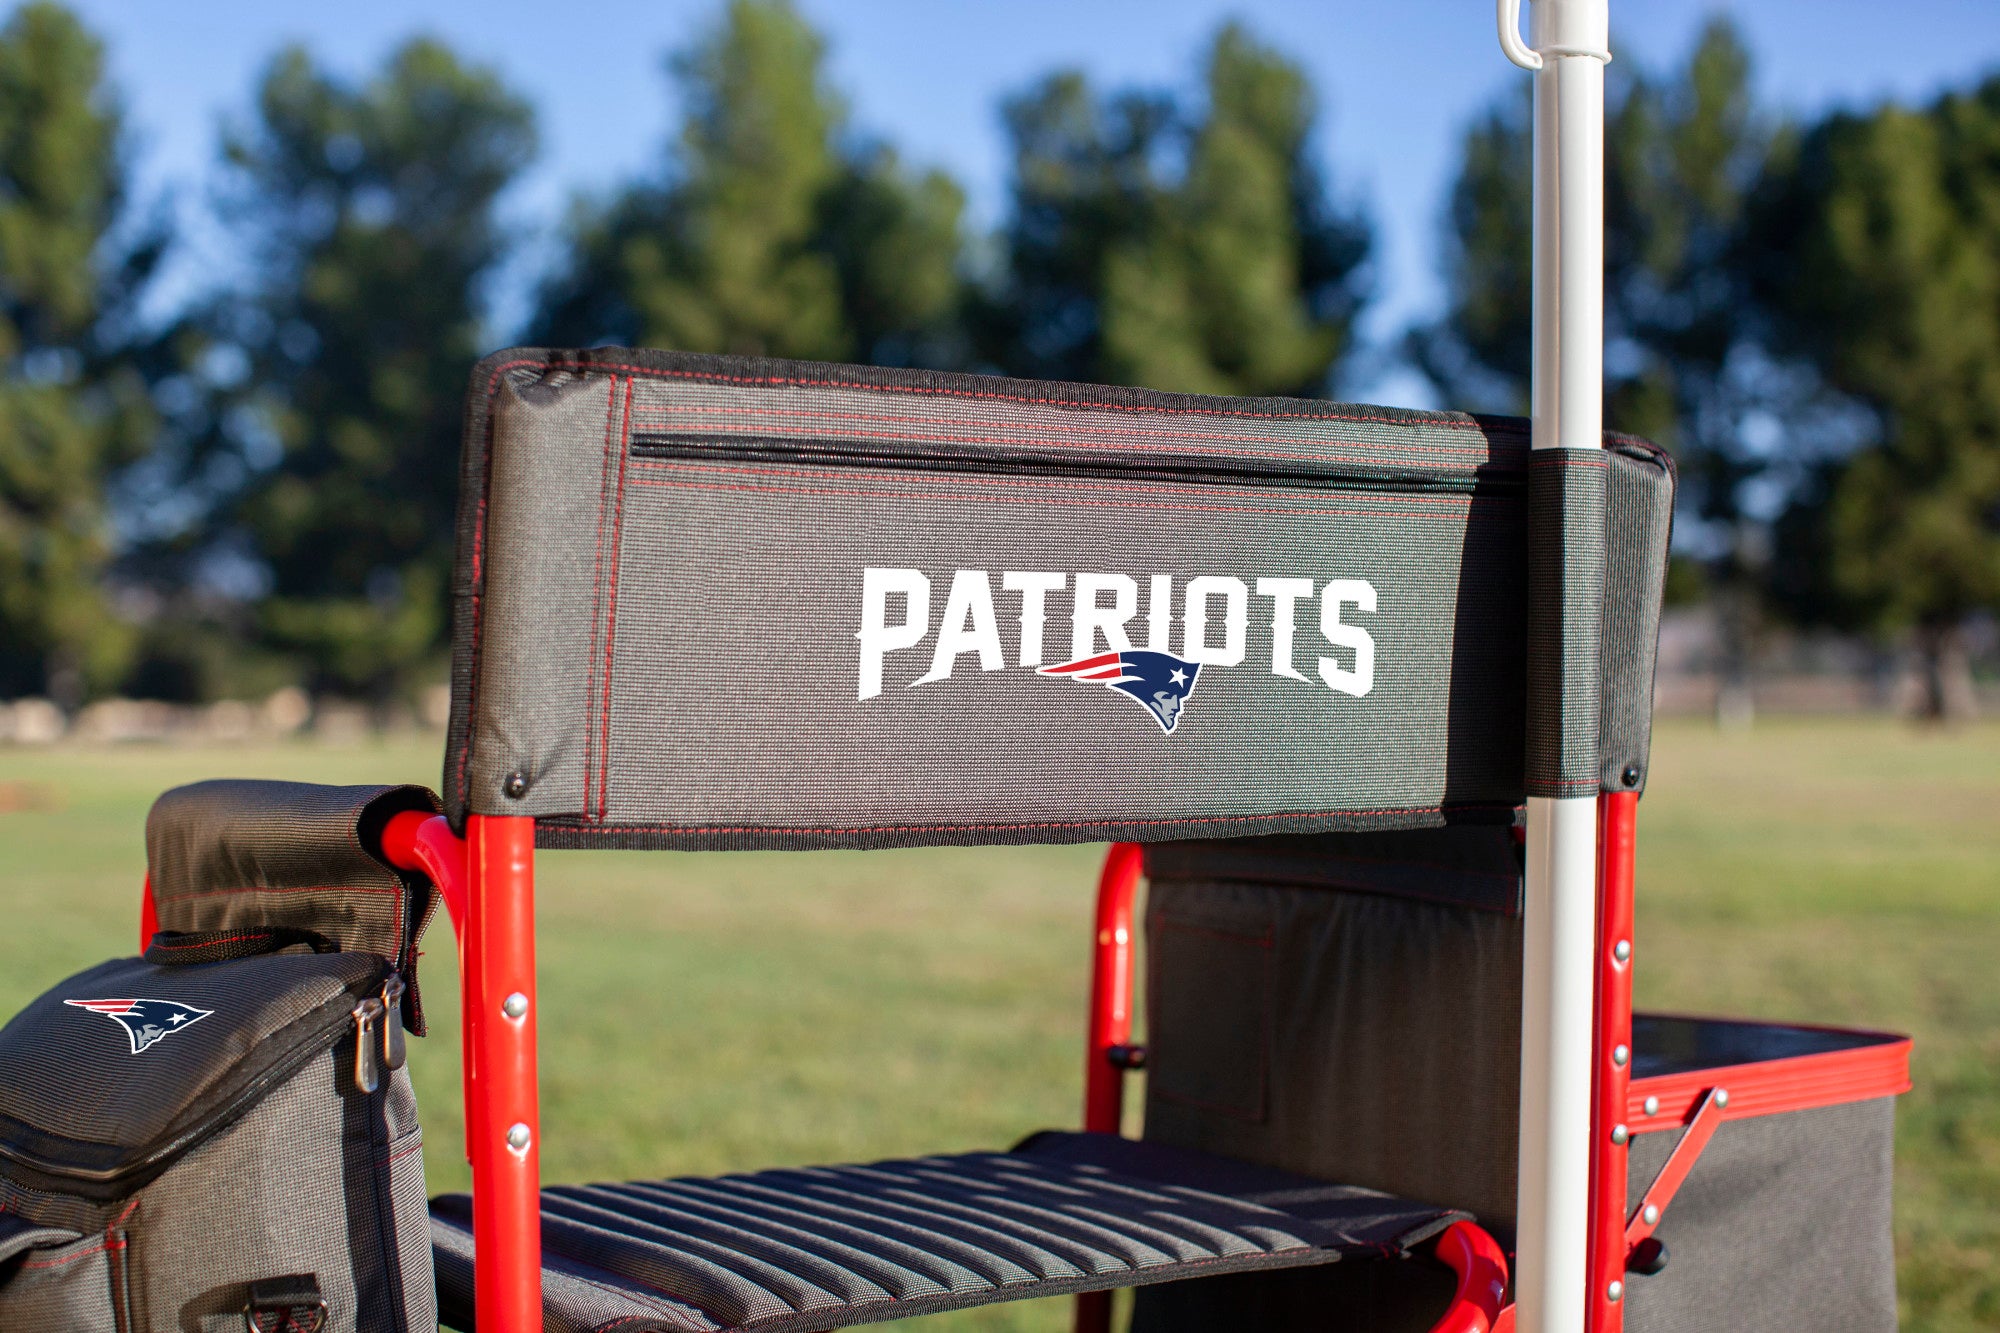 New England Patriots - Fusion Camping Chair